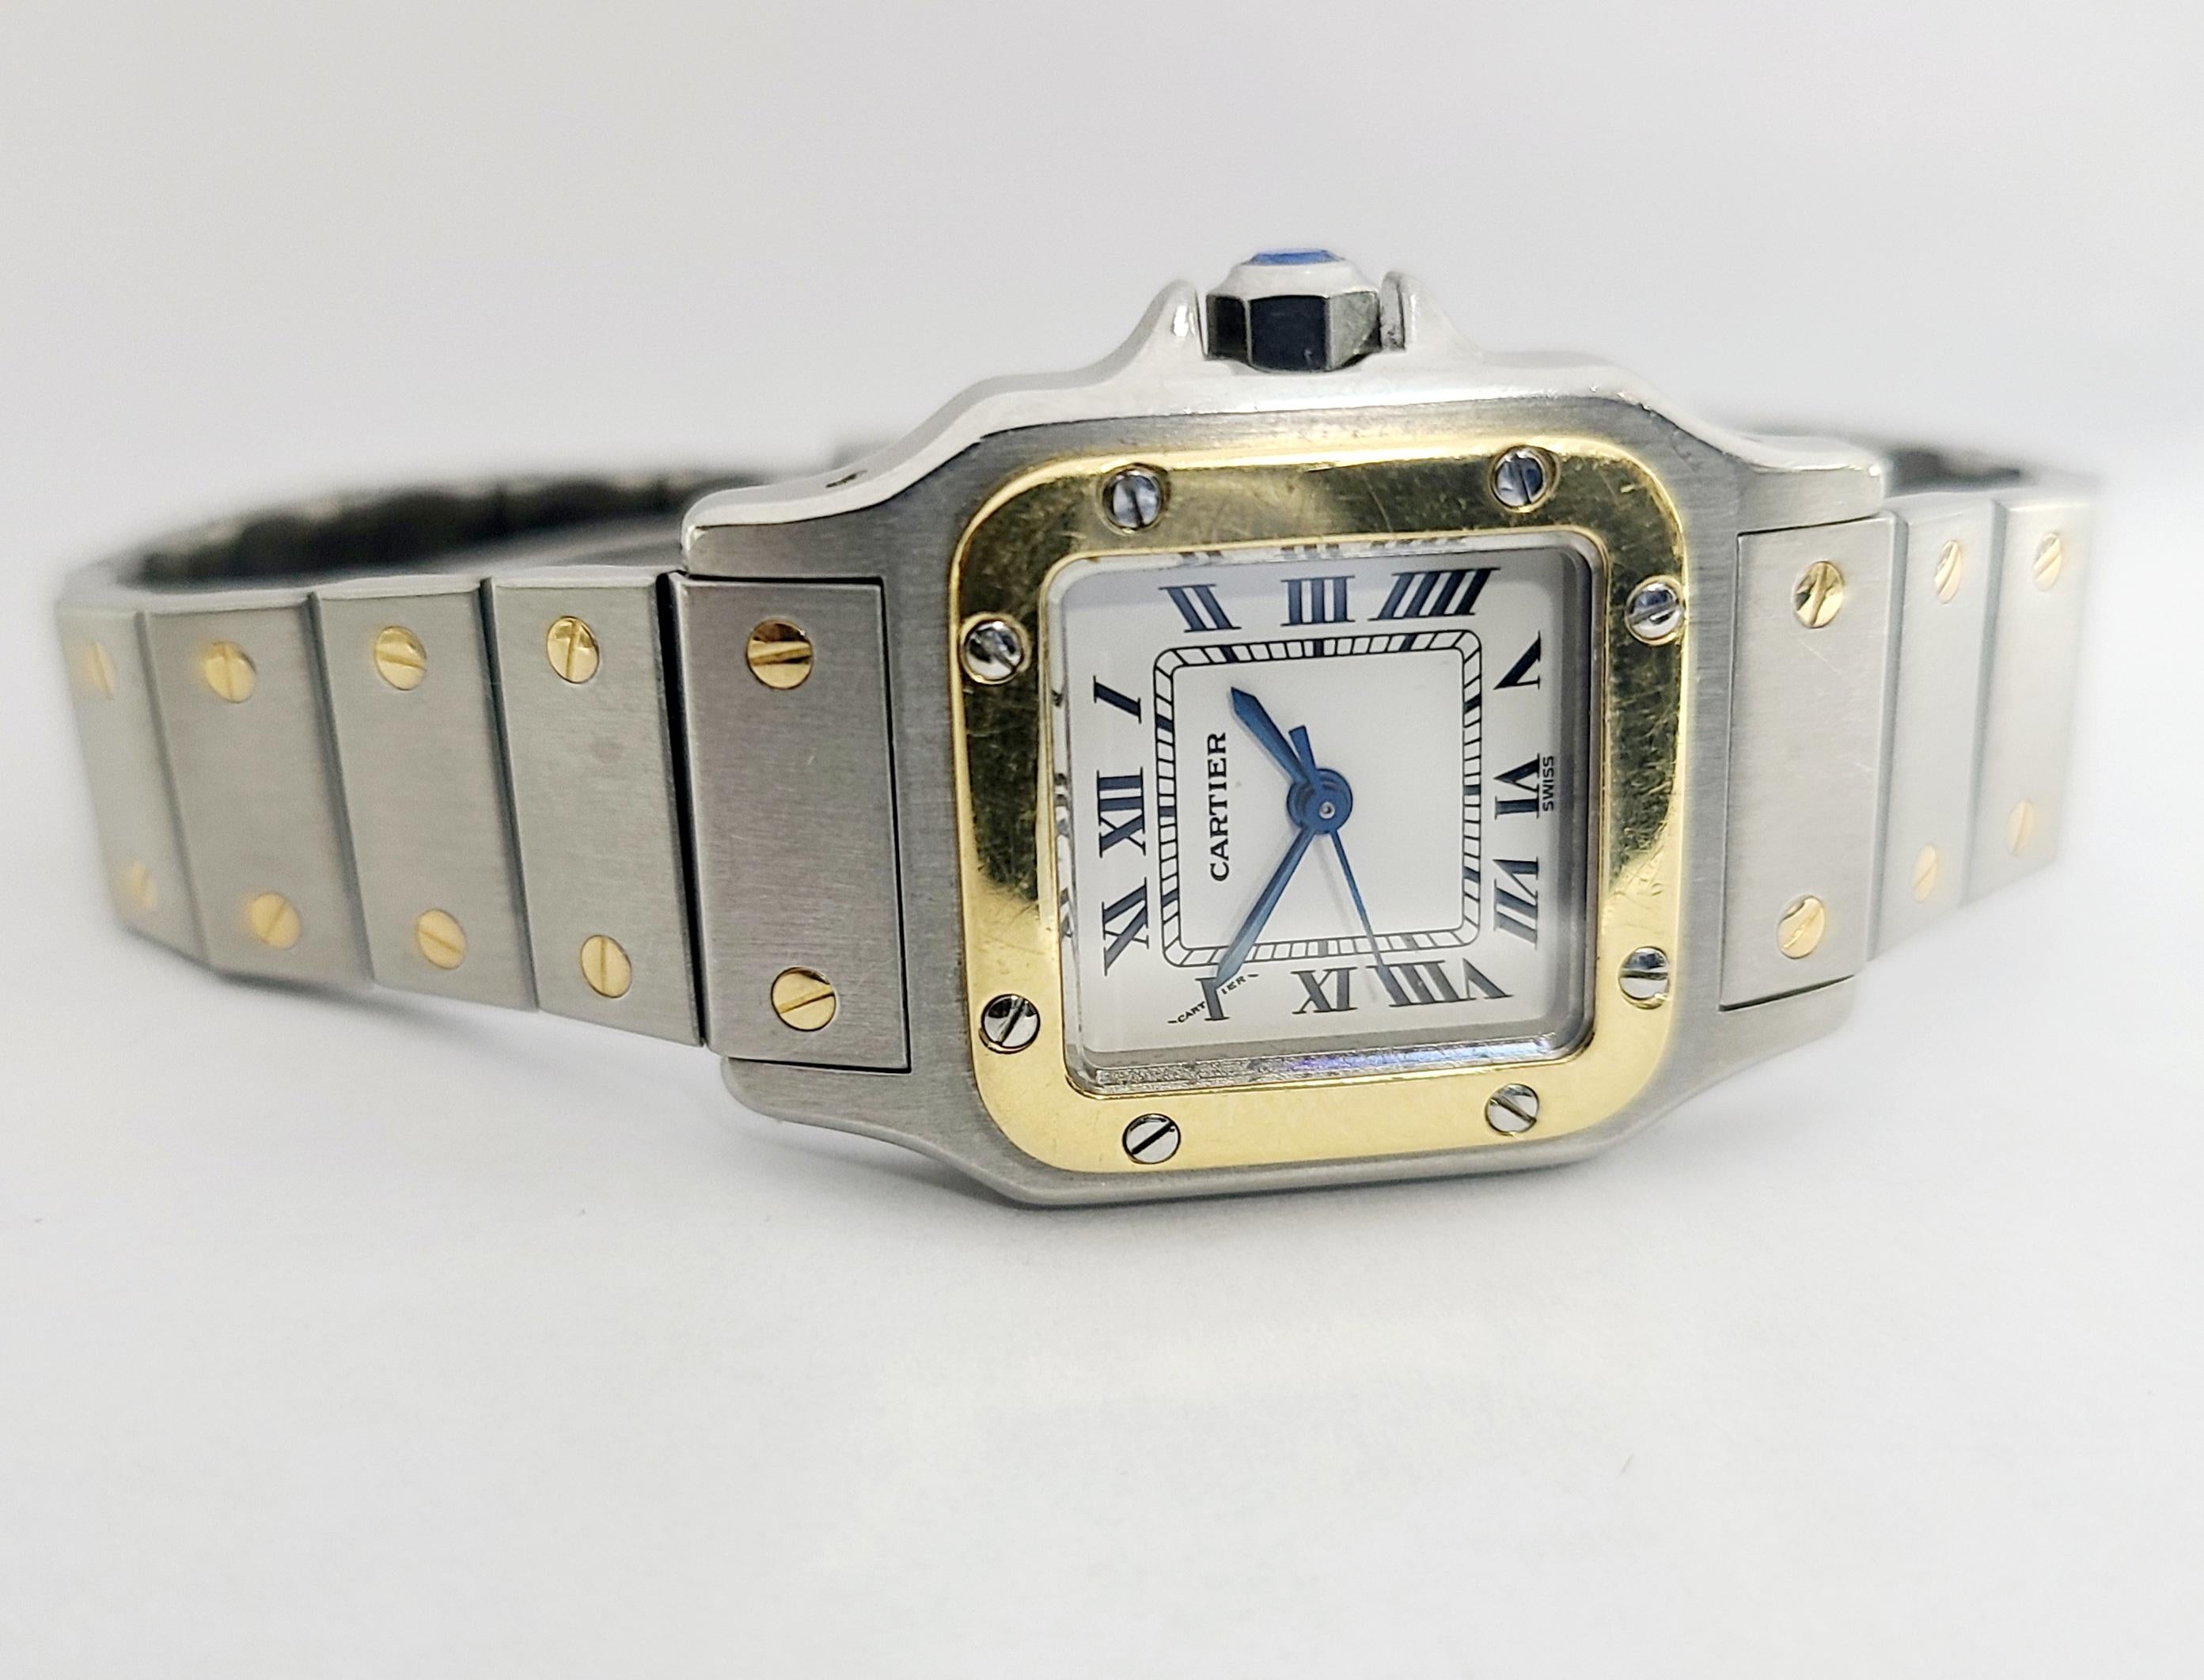 Vintage Cartier 18k Gold Steel Santos Automatic Ladies Watch 24mm.  Running strong and keeping great time.  This authentic Cartier automatique wristwatch is made from 18k yellow gold on the bezel and on the screws of the bracelet, and stainless